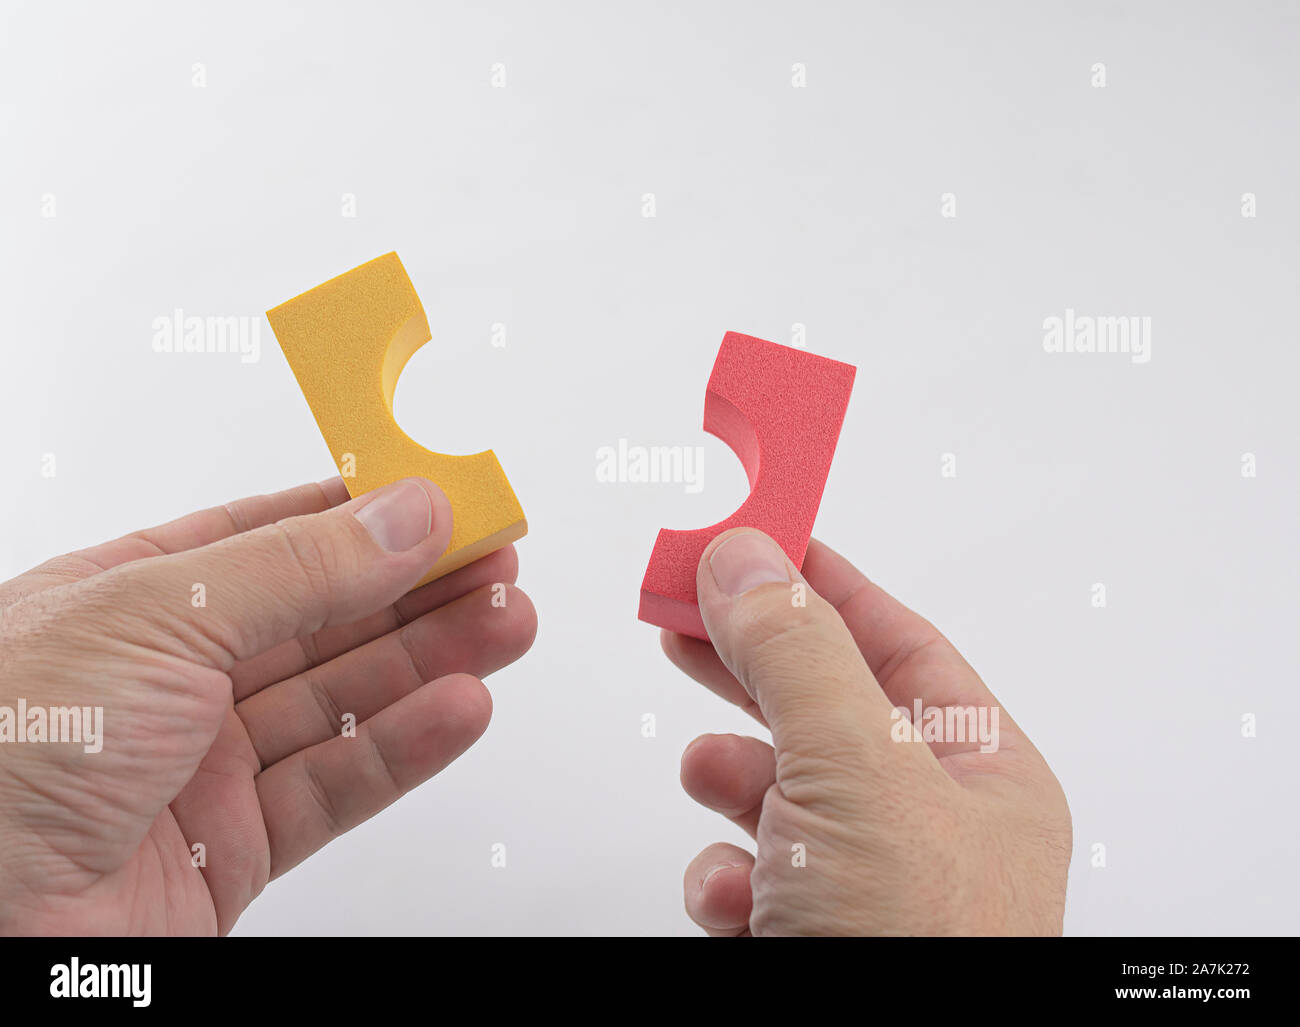 Caucasian man's hands with two pieces of a foam and red and yellow children's construction toy on white background. Conceptual. Stock Photo